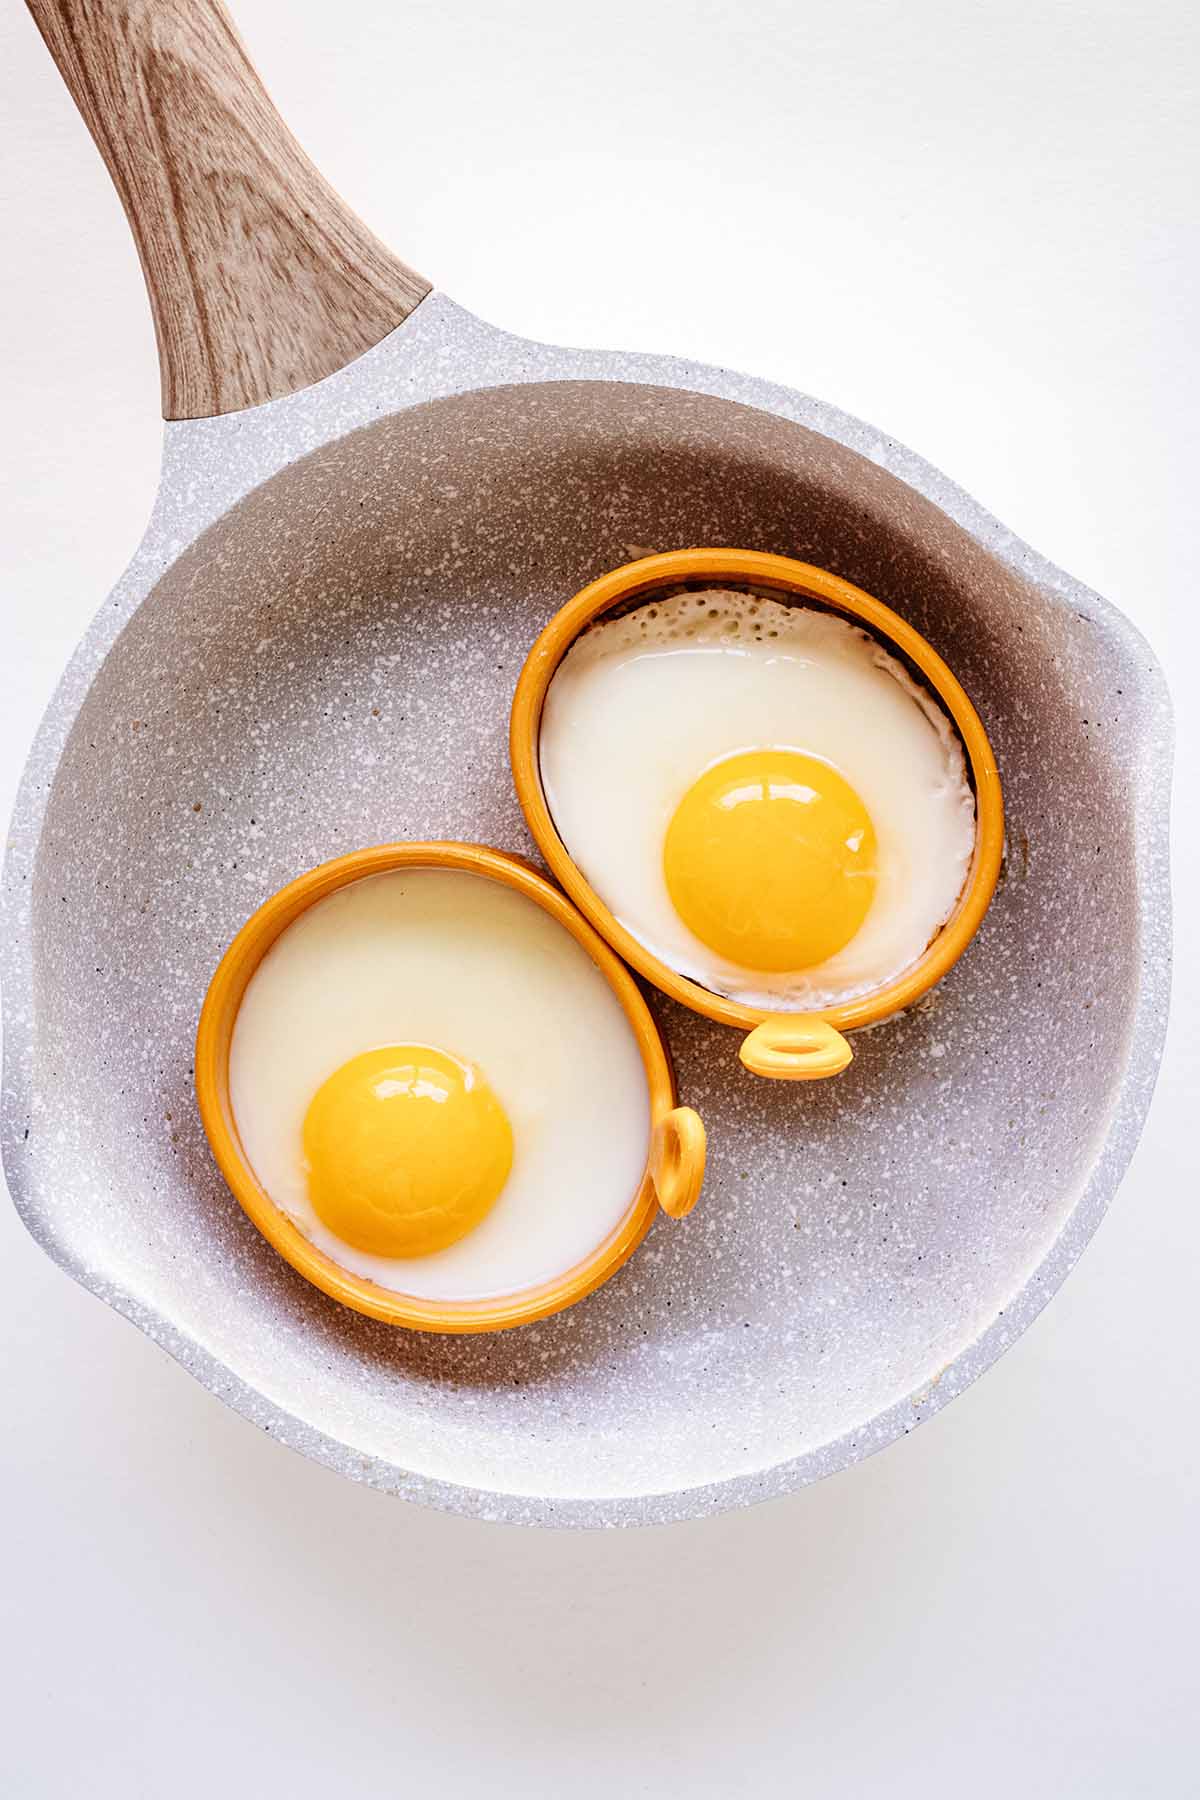 Two eggs in egg rings cooking in a small white skillet with a light wooden handle.